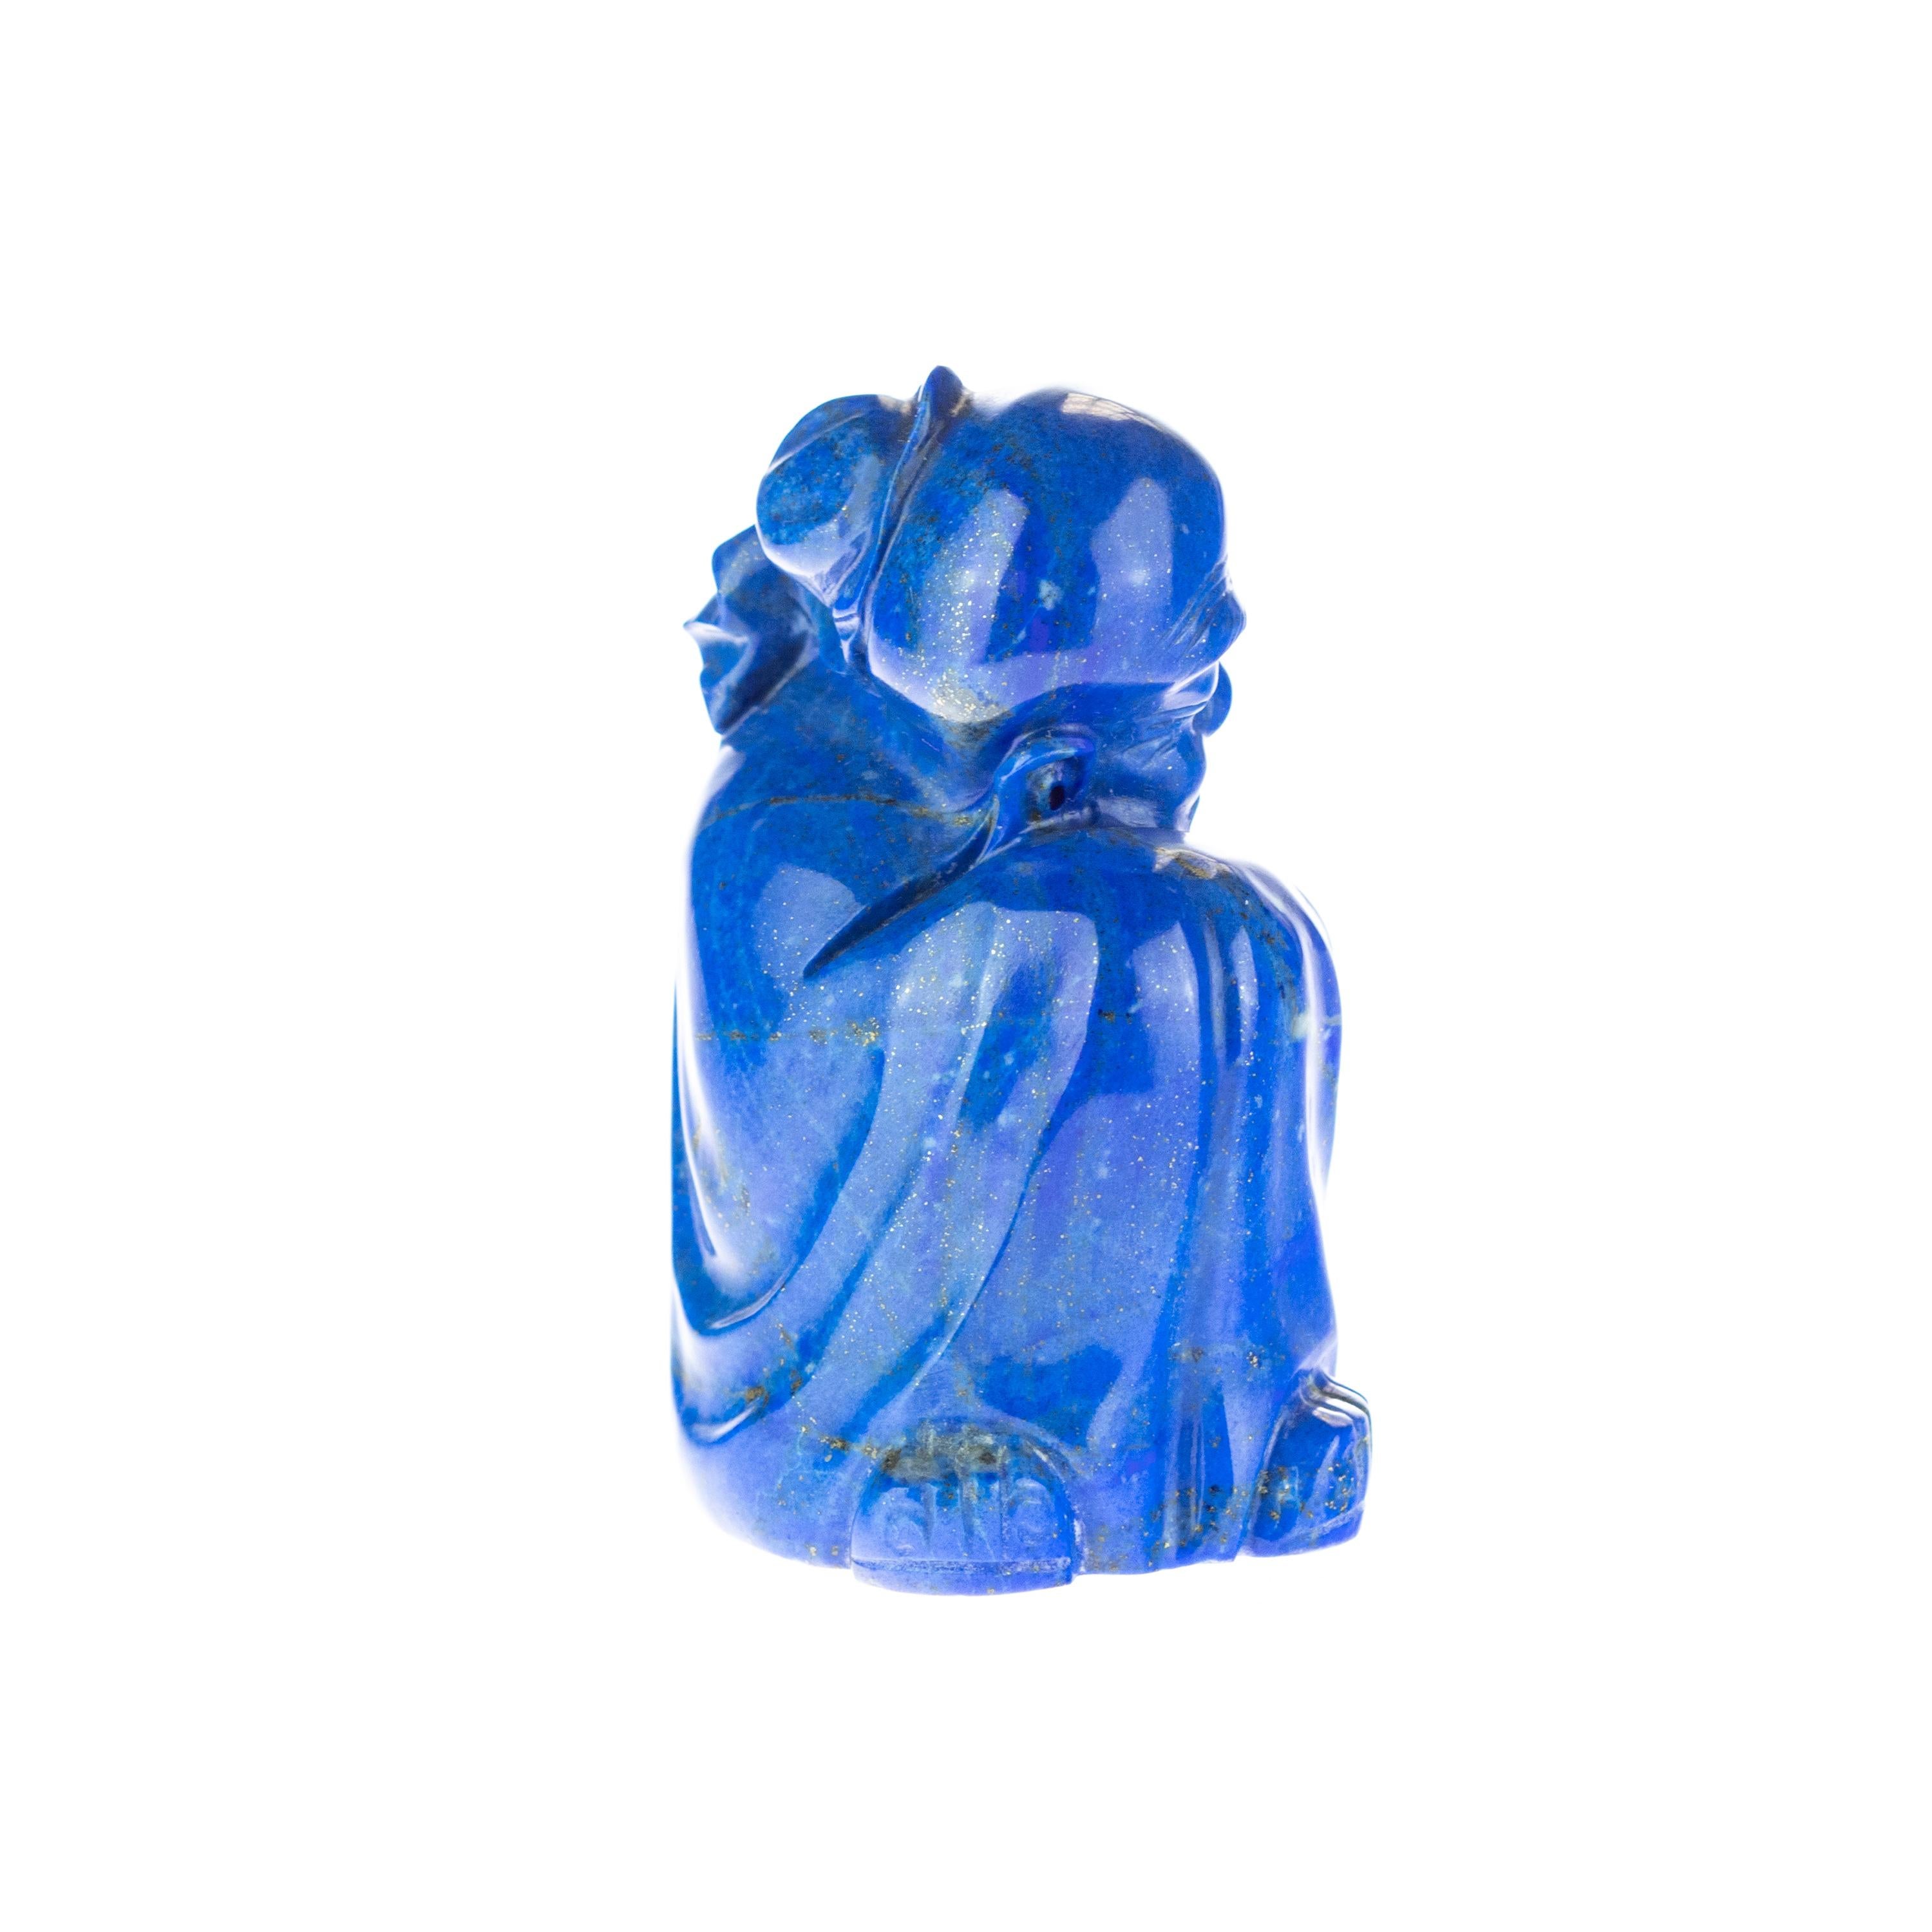 Hand-Carved Lapis Lazuli Wise Men Figurine Carved Human Culture Artisanal Statue Sculpture For Sale